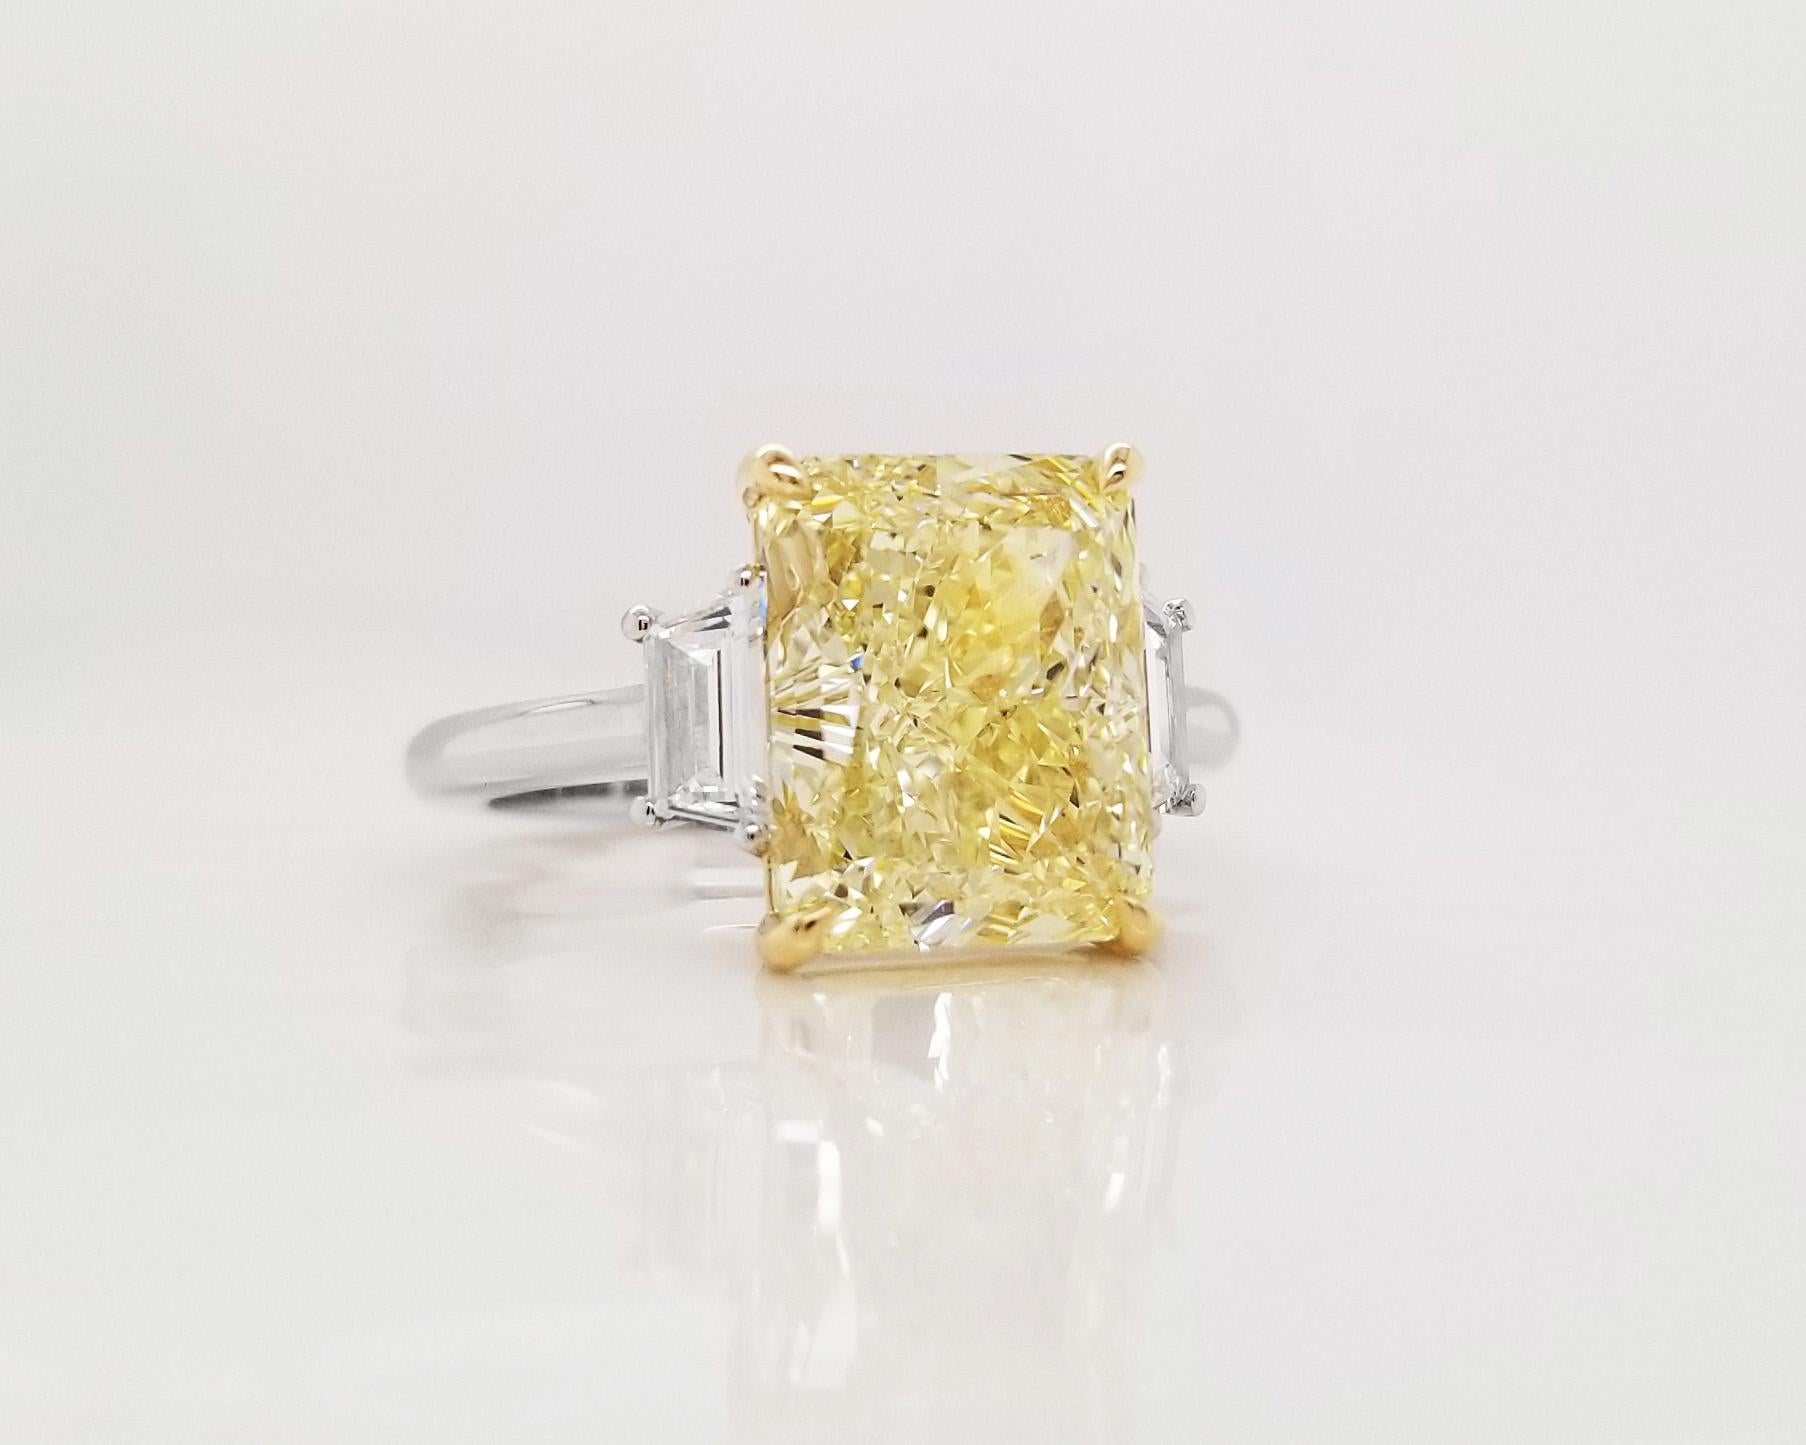 From SCARSELLI, this beautiful engagement ring features an over 5-carat Fancy Light Yellow radiant cut diamond of VVS2 clarity (see certificate picture for detailed main stone's information) flanked by 2 trapezoids totaling 0.41ct (0.20each).